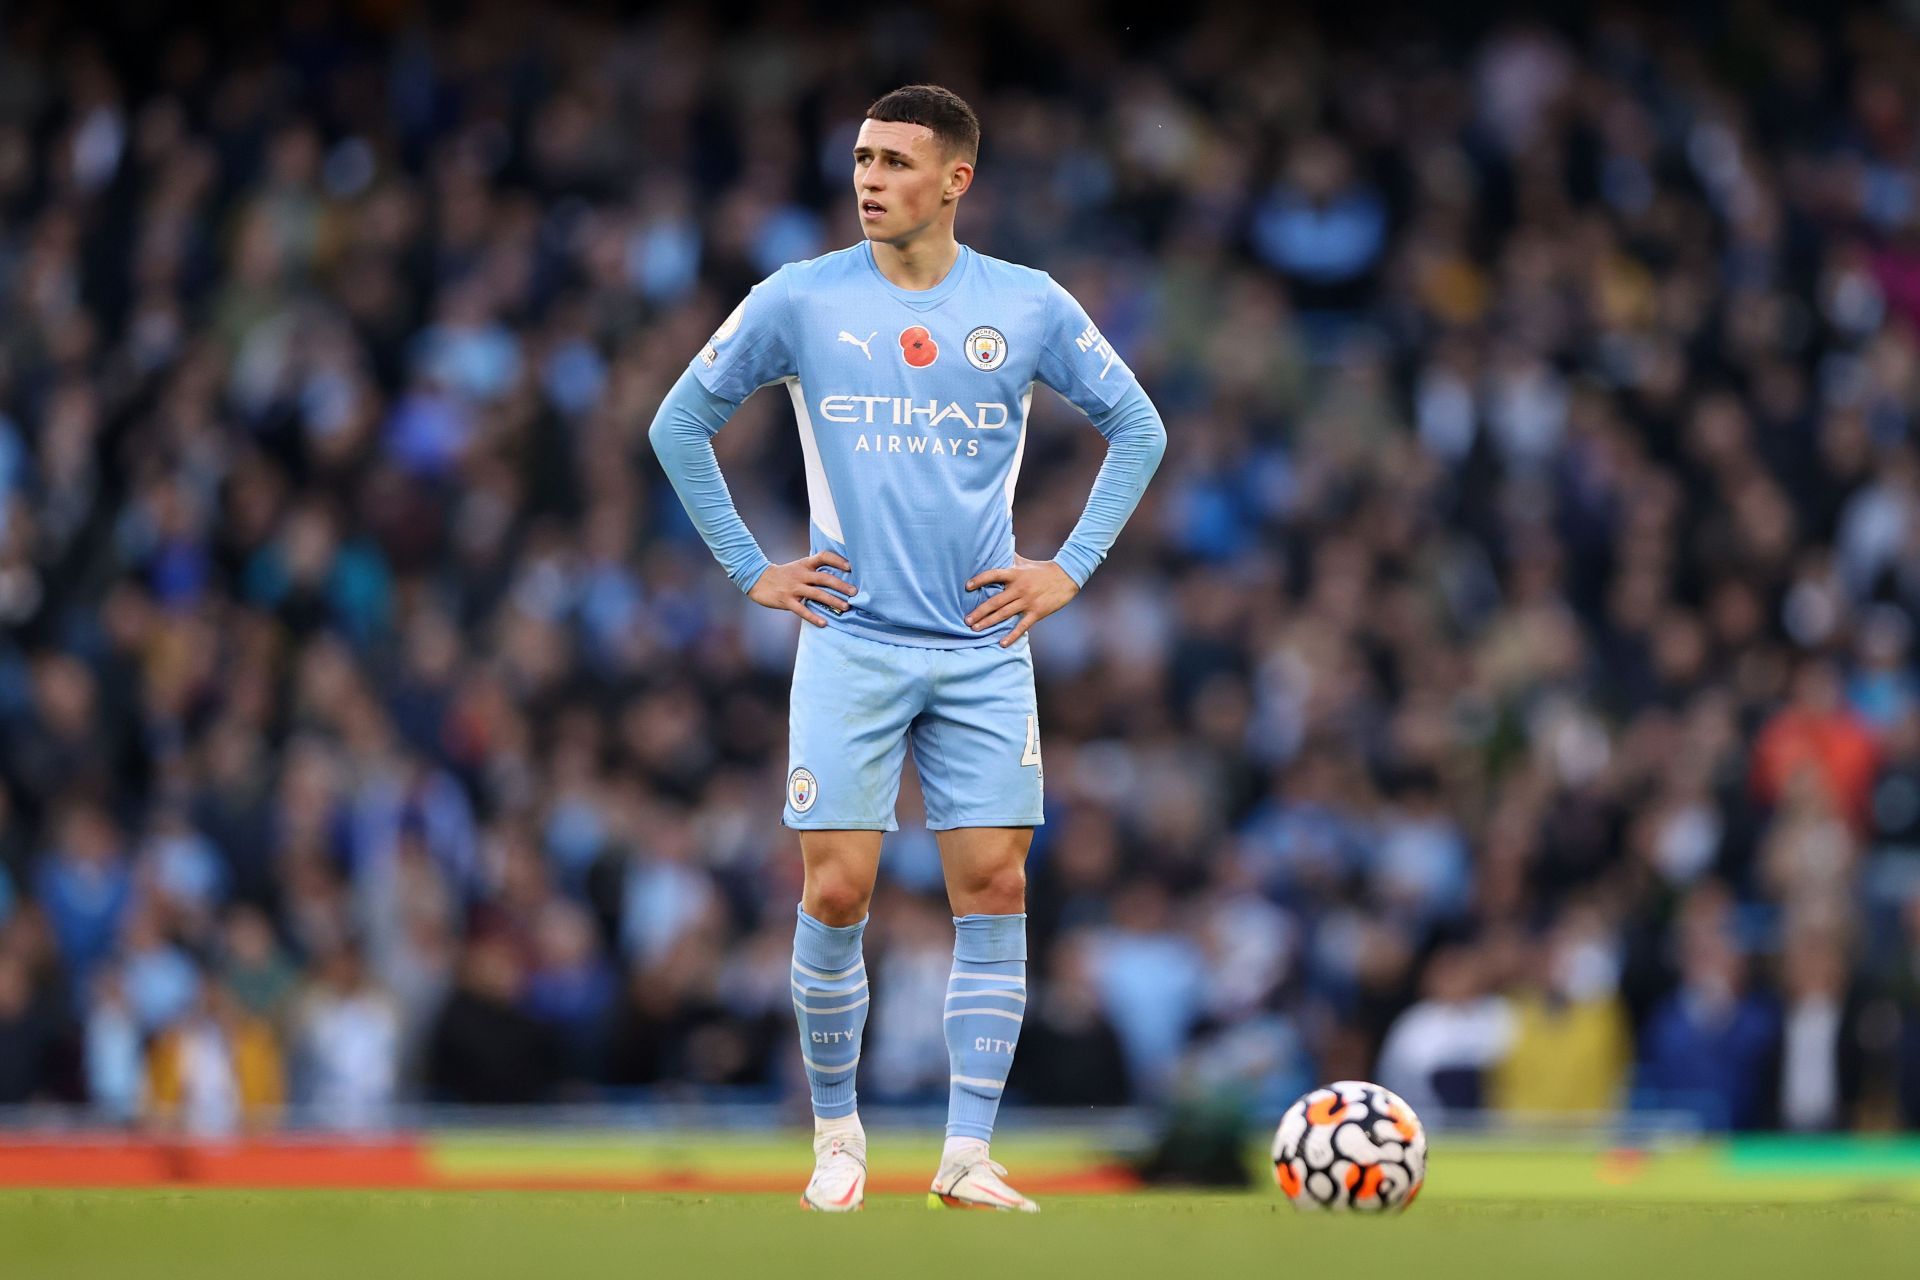 Foden will look forward to continue getting regular game time in the Premier League